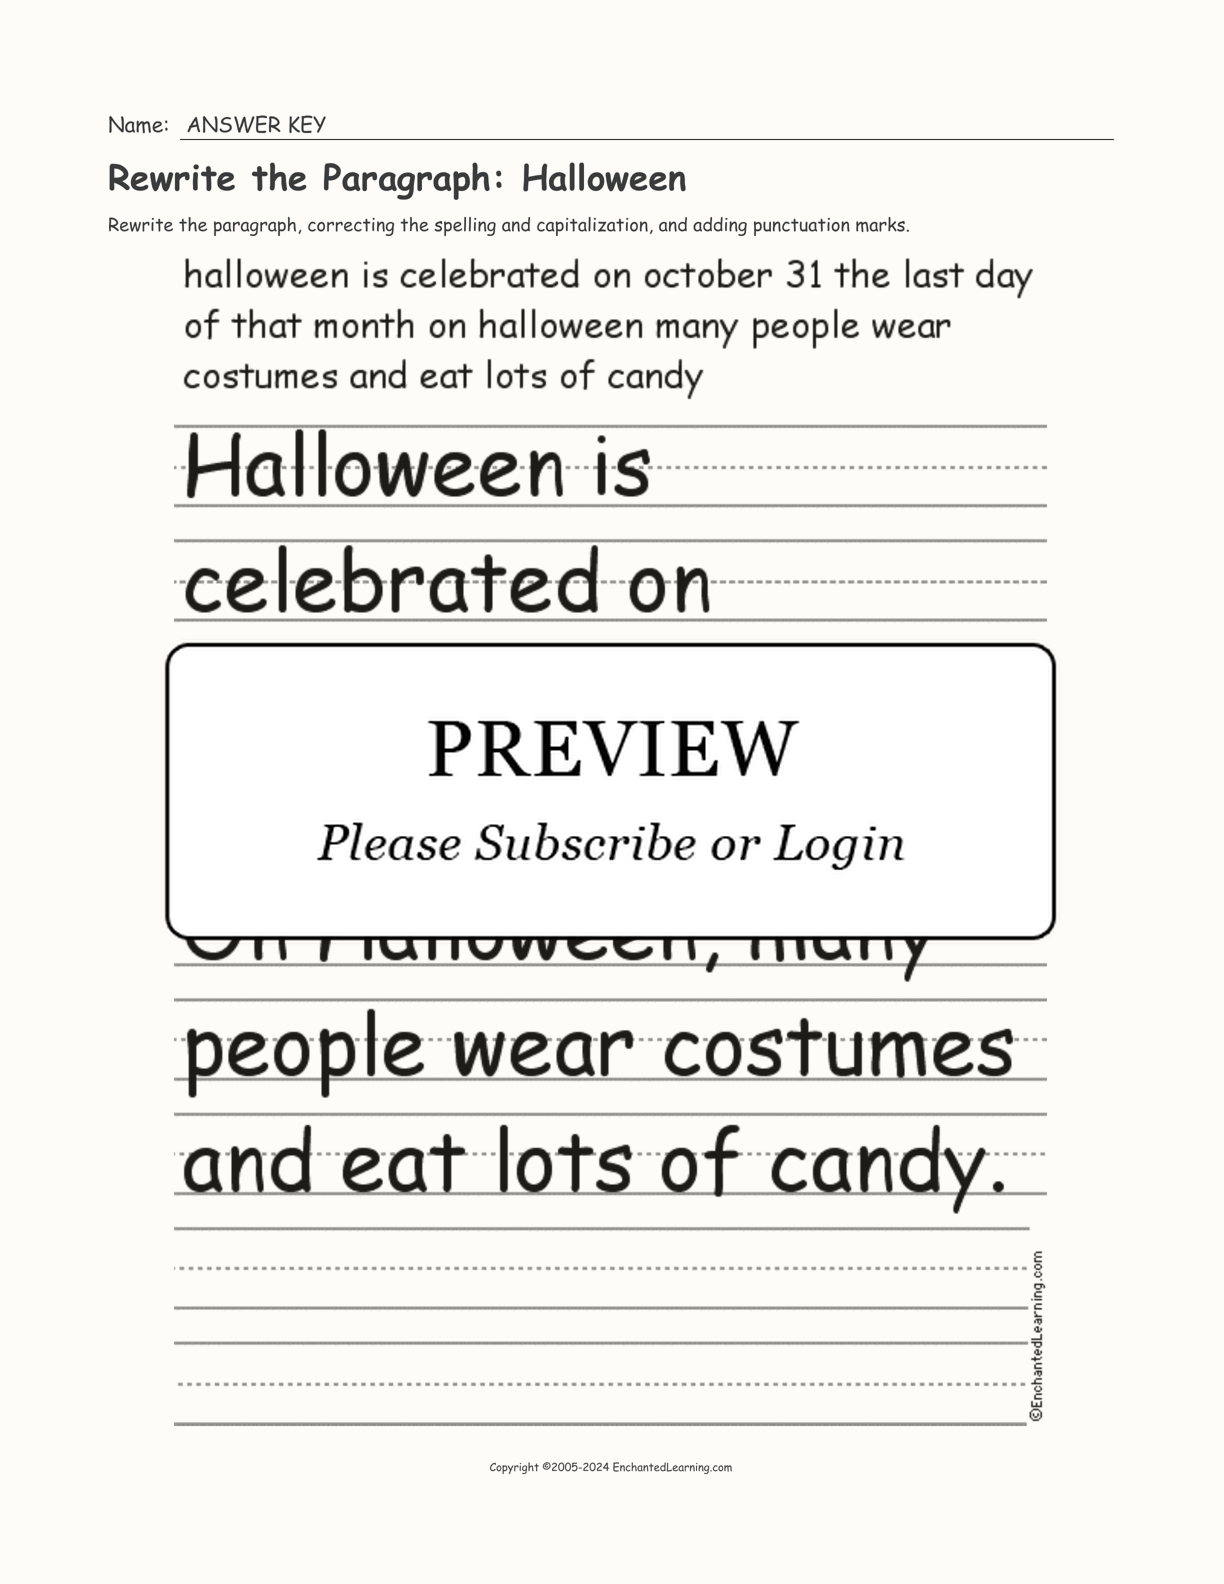 Rewrite the Paragraph: Halloween interactive worksheet page 2